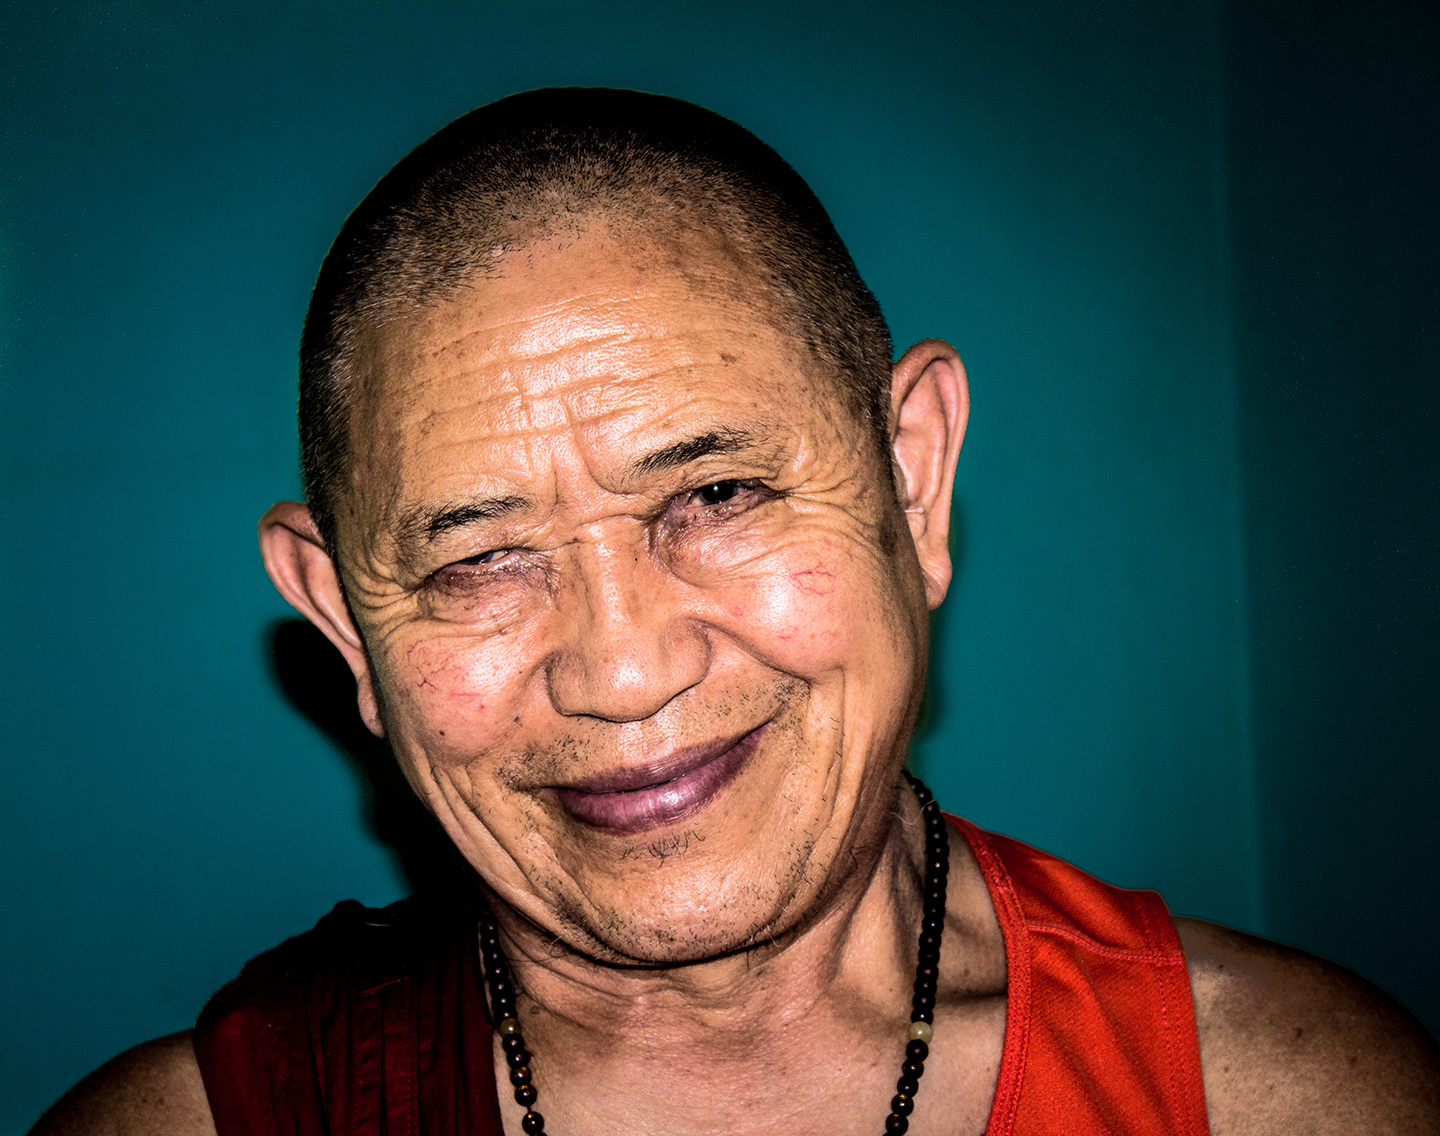 Garchen Rinpoche on the Six Dharmas of Naropa – Buddha Visions